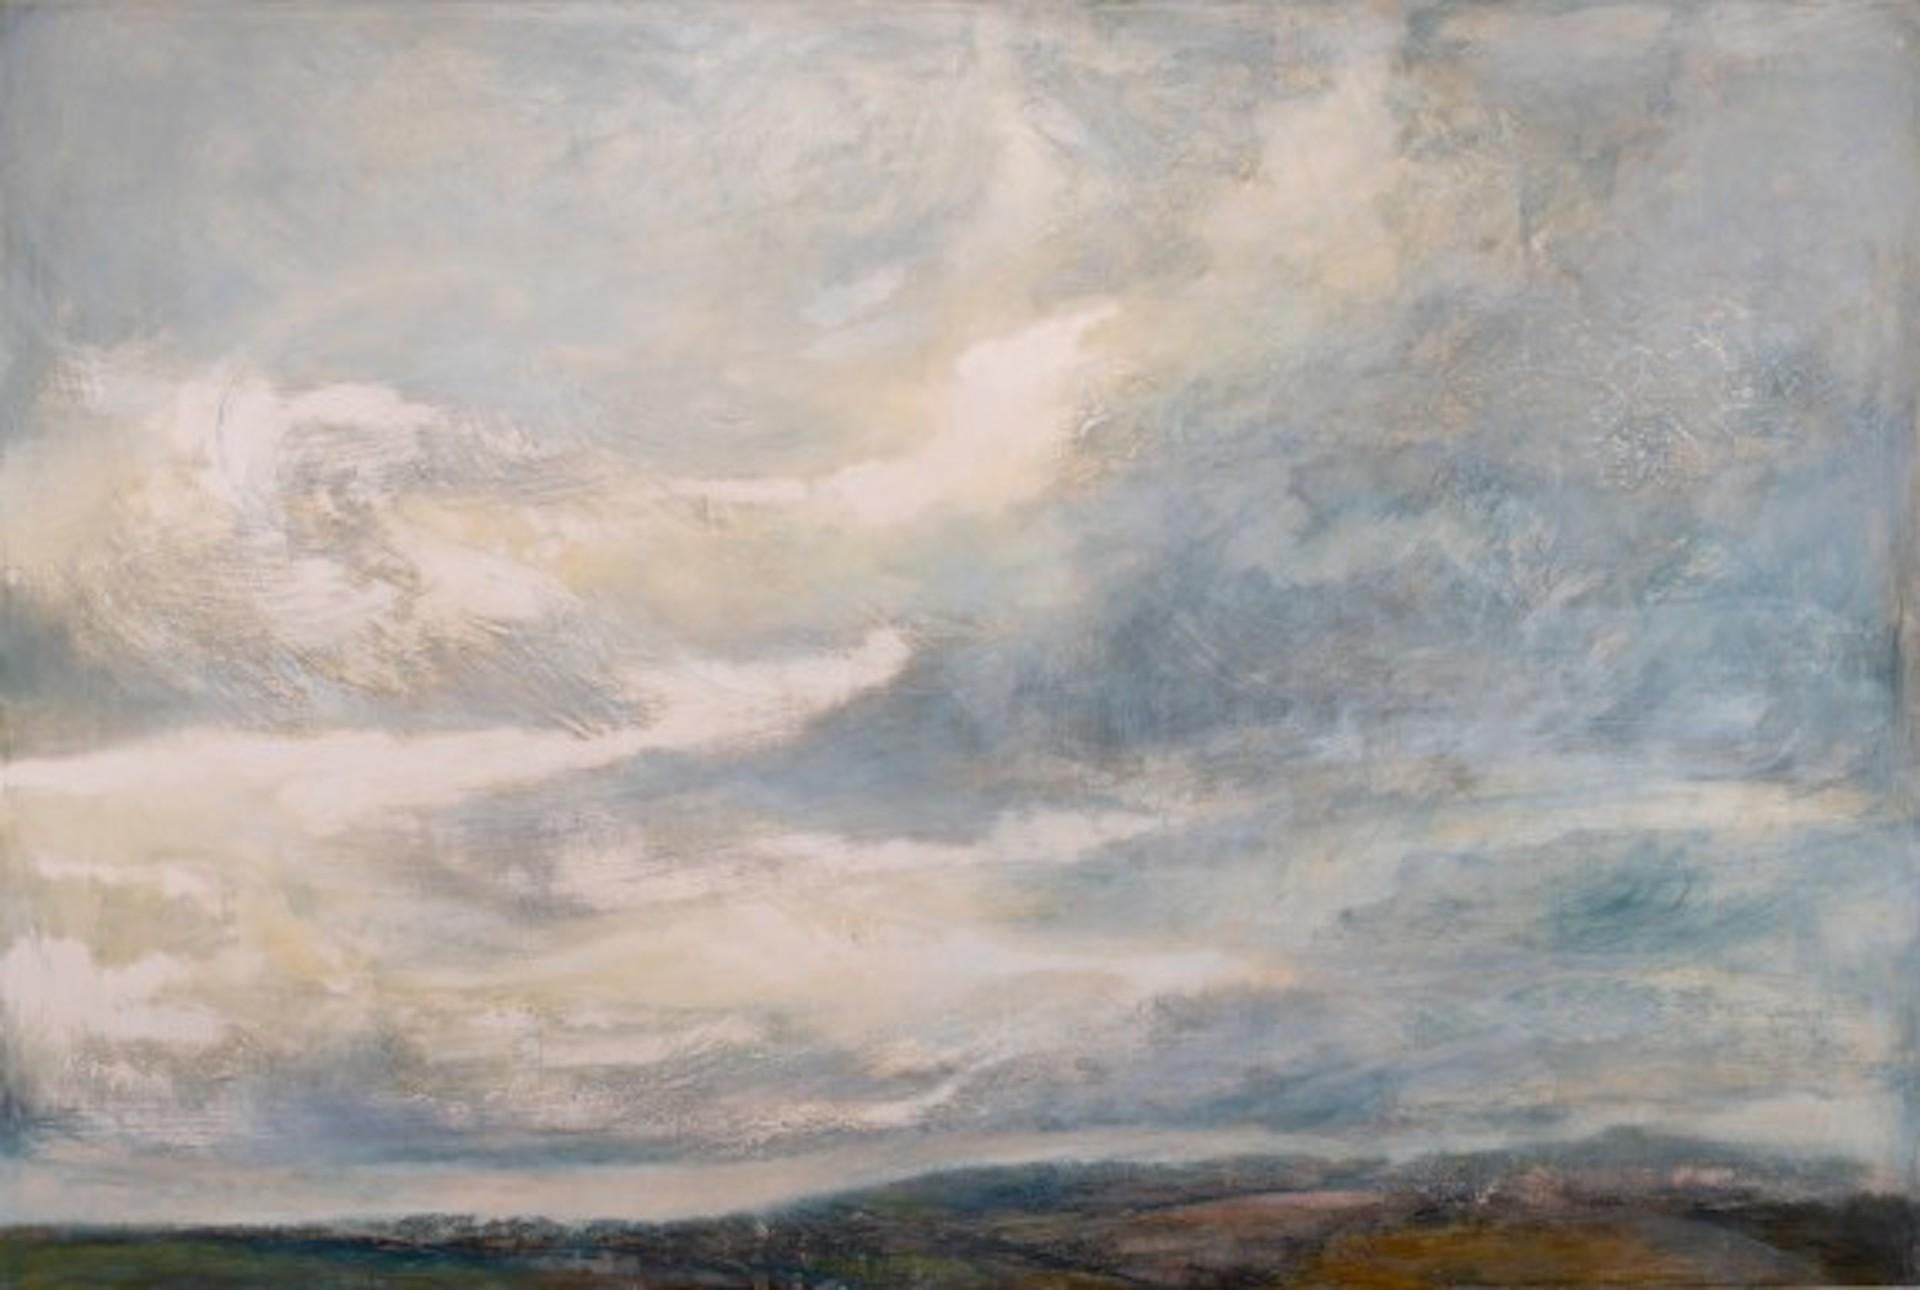 Alex McIntyre  Landscape Painting - Chromatic Grey Skies, Atmospheric Skyscape Painting, Large Realist Statement Art